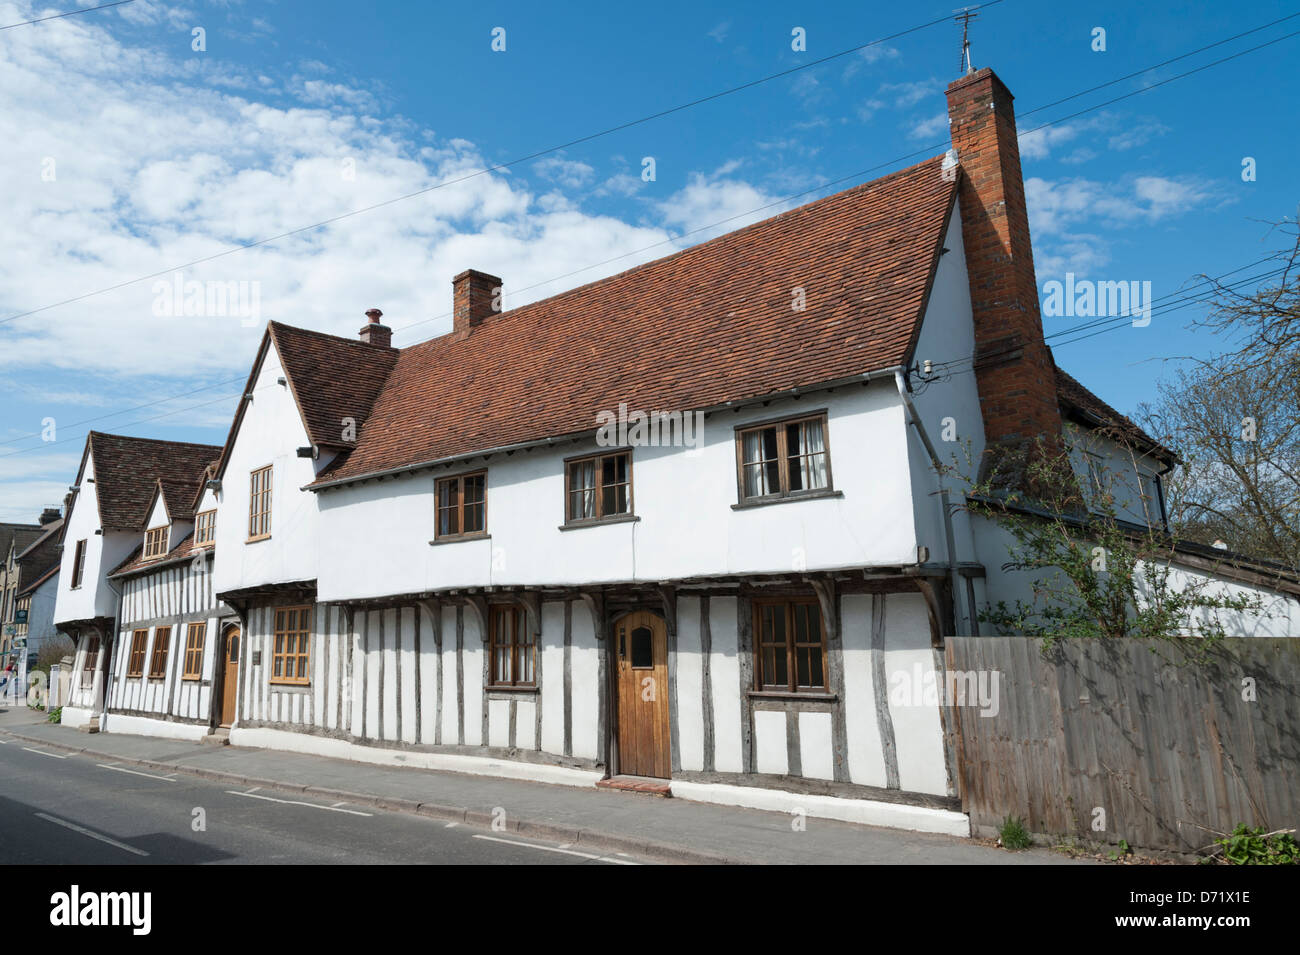 A beautiful old half timbered house in Ashwell Hertfordshire UK Stock Photo